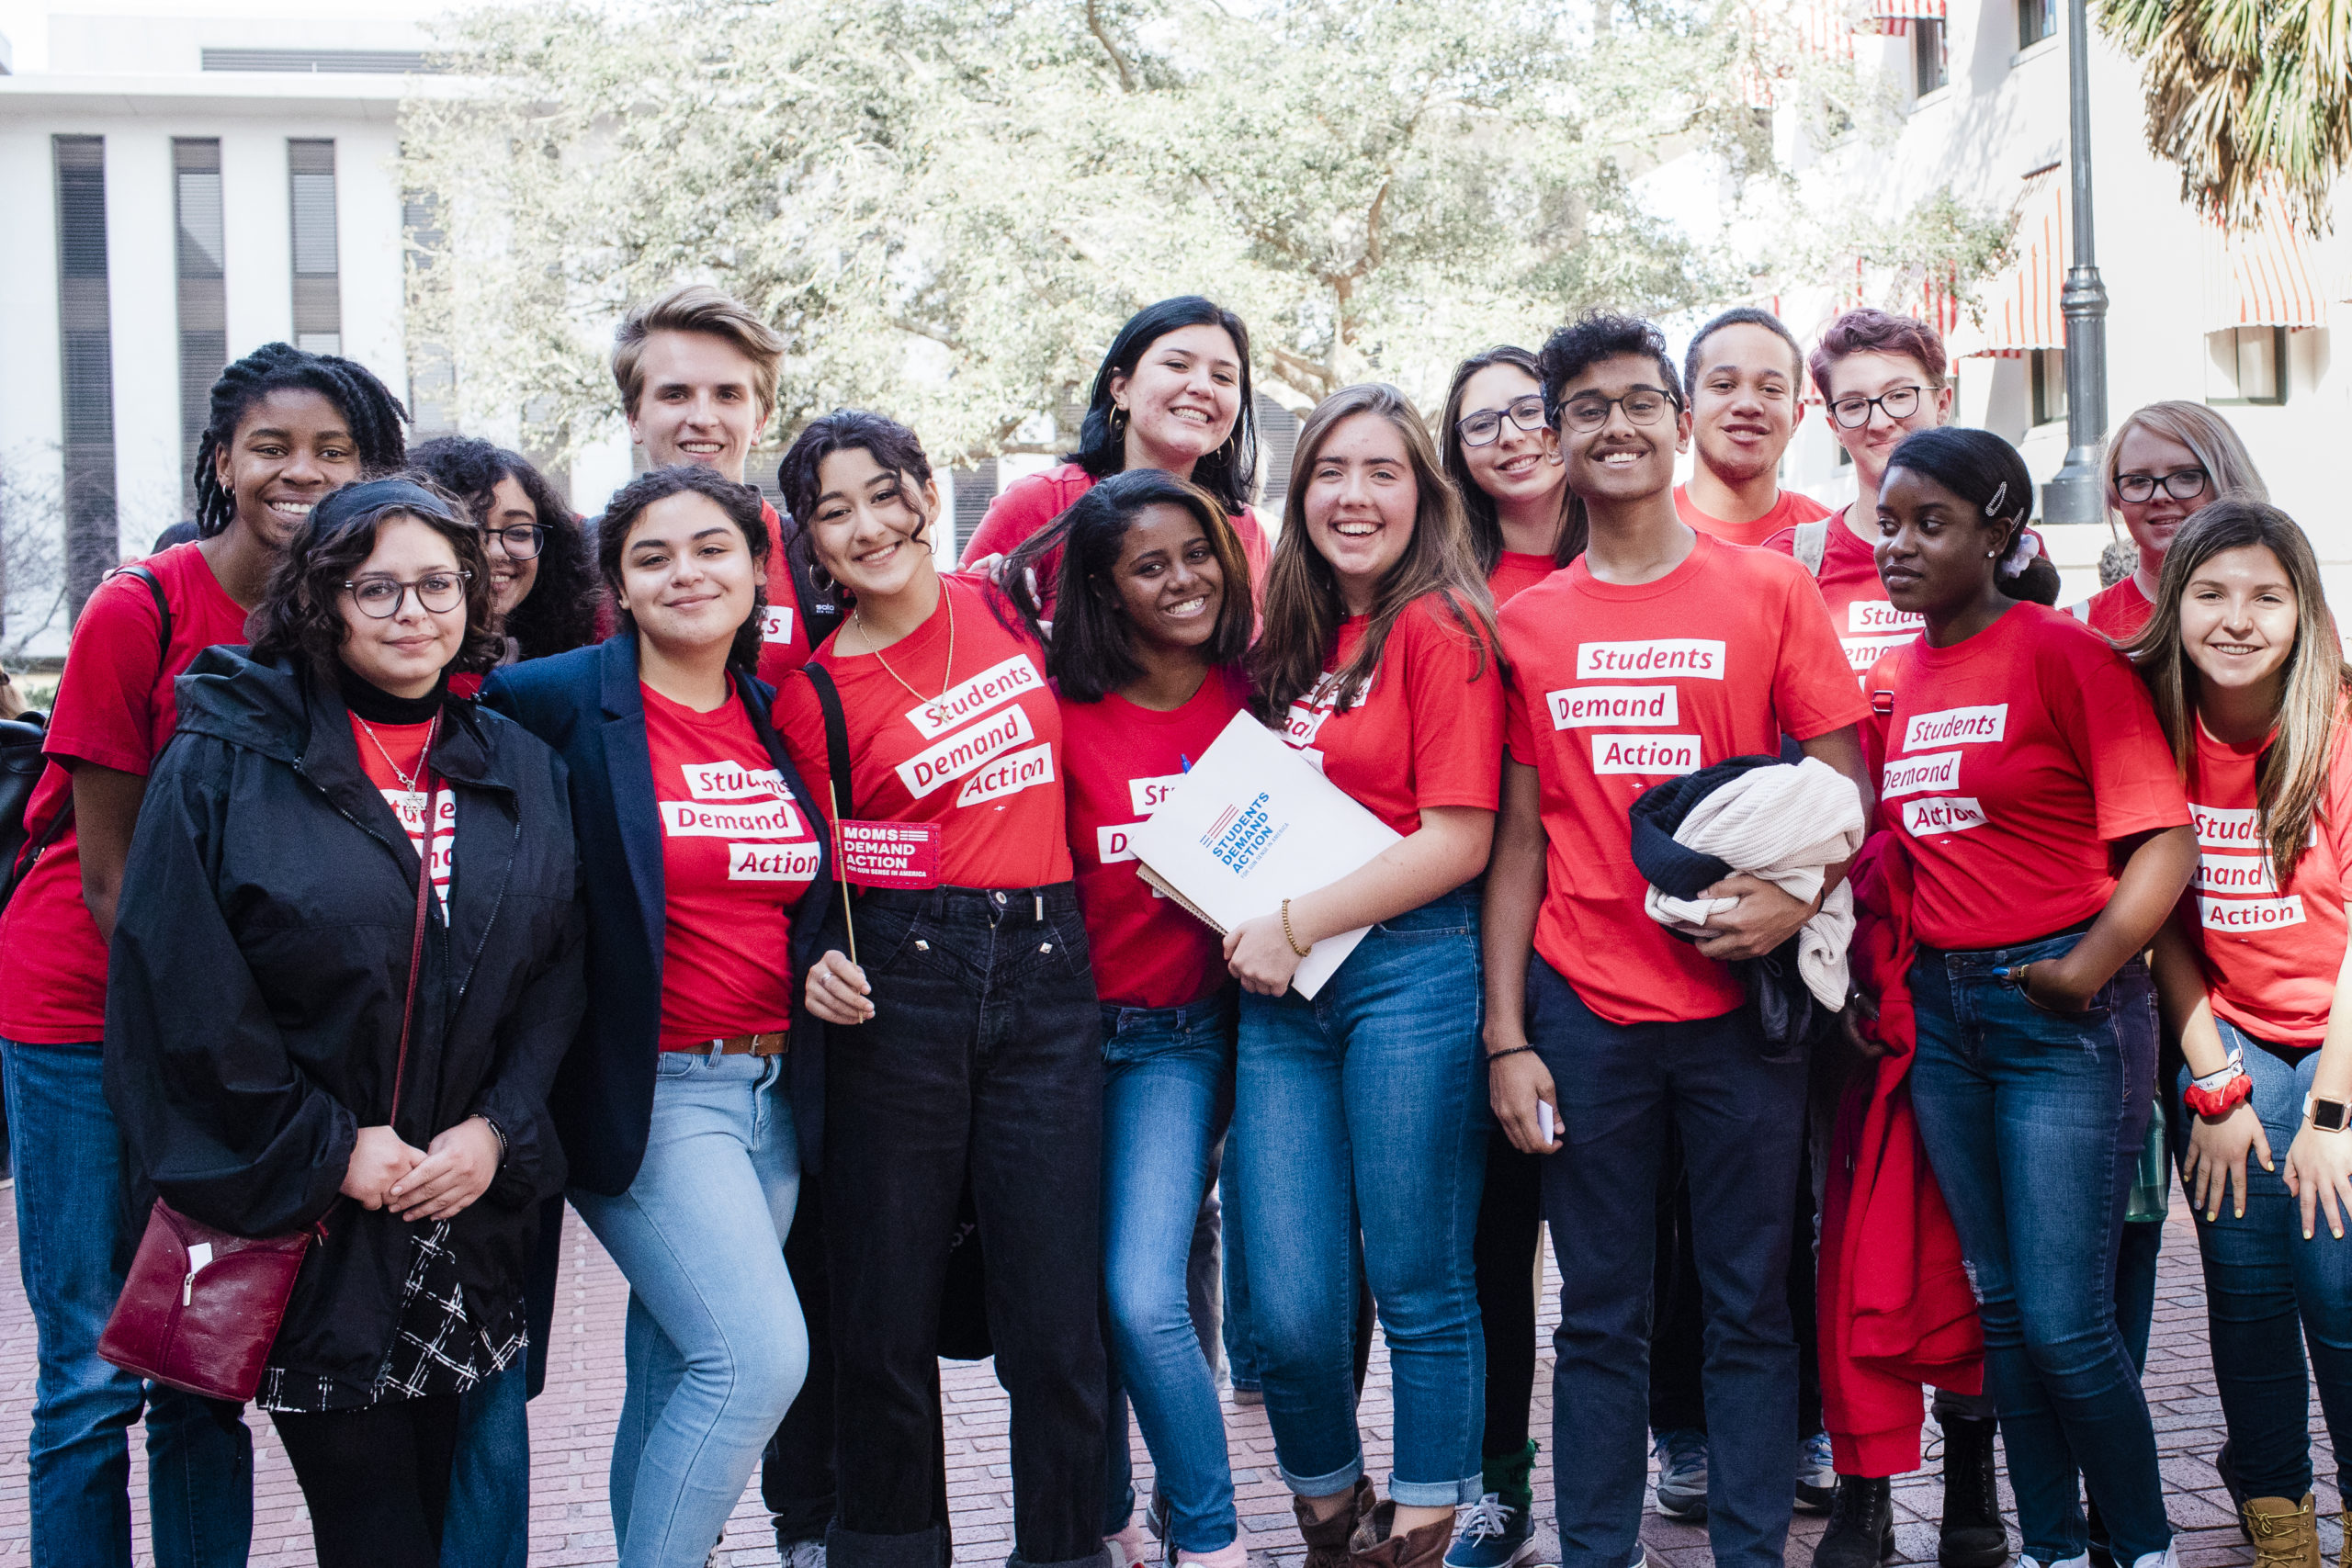 Group photo of nearly 20 Students Demand Action volunteers at an Advocacy Day